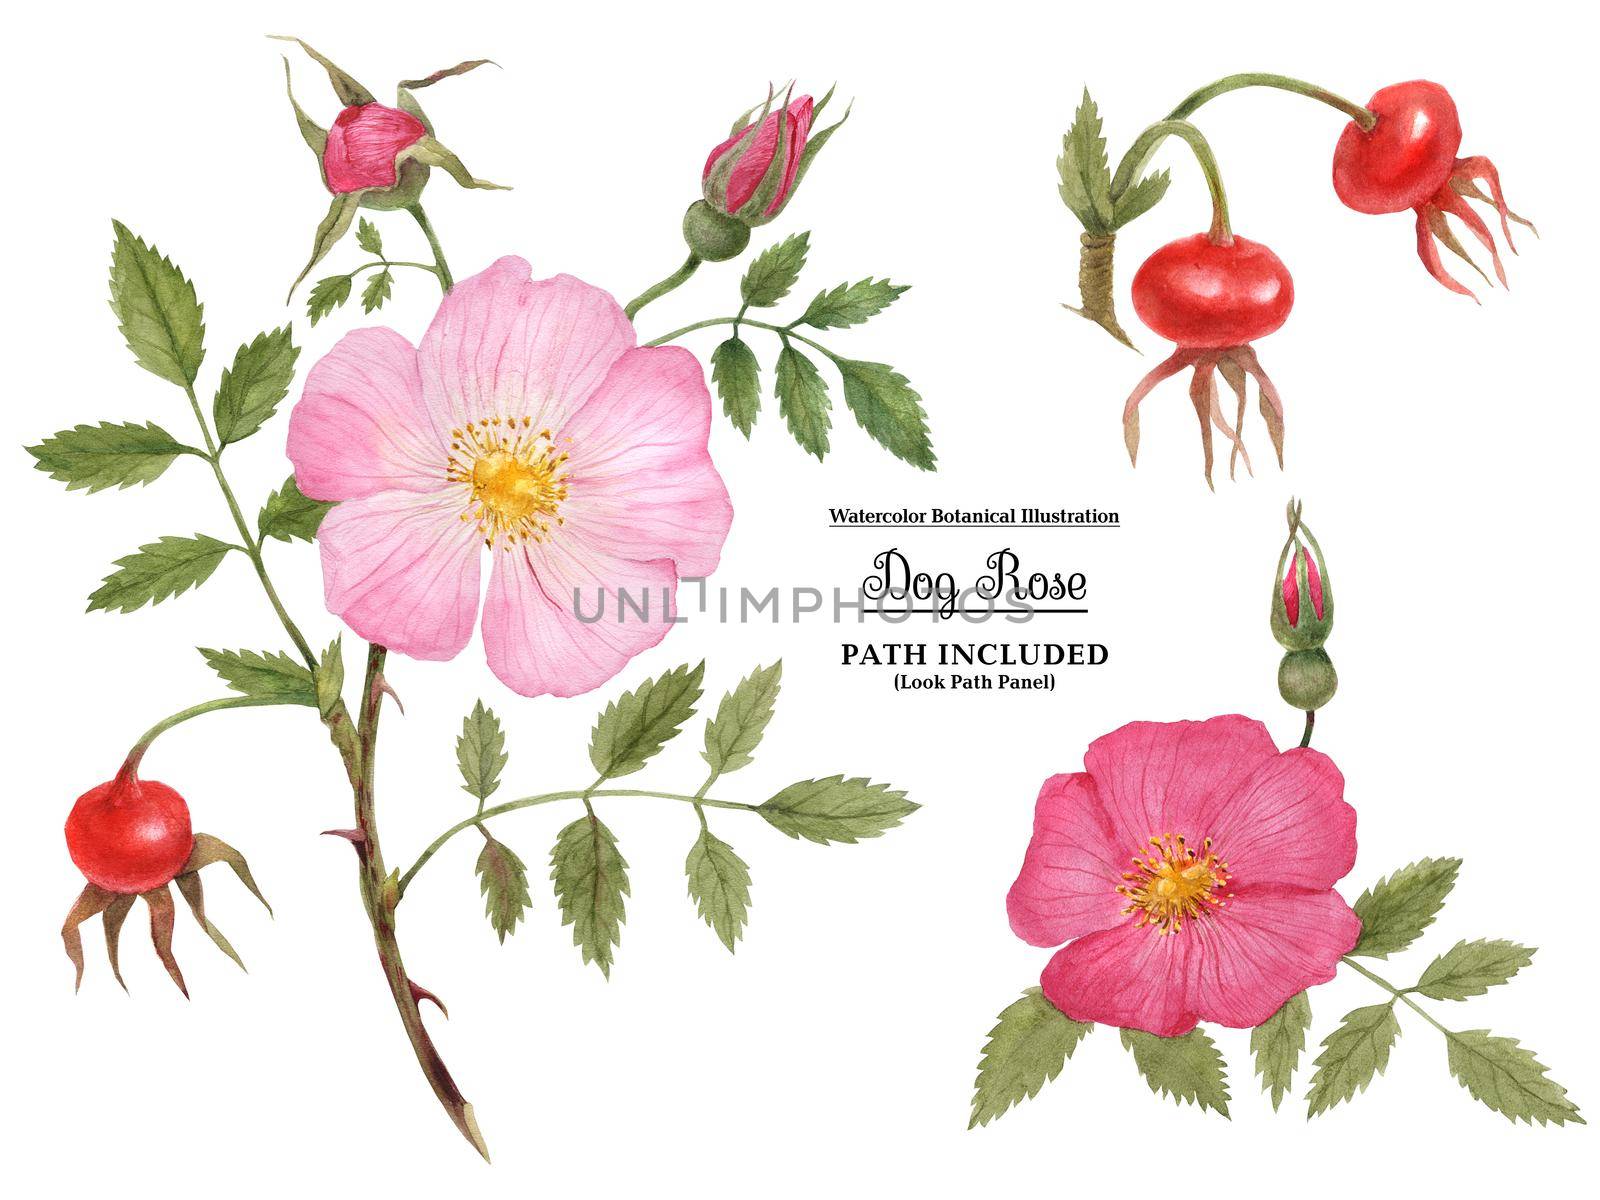 Watercolor Botanical Illustration branch, fruit and flower of cinnamon rose by Xeniasnowstorm